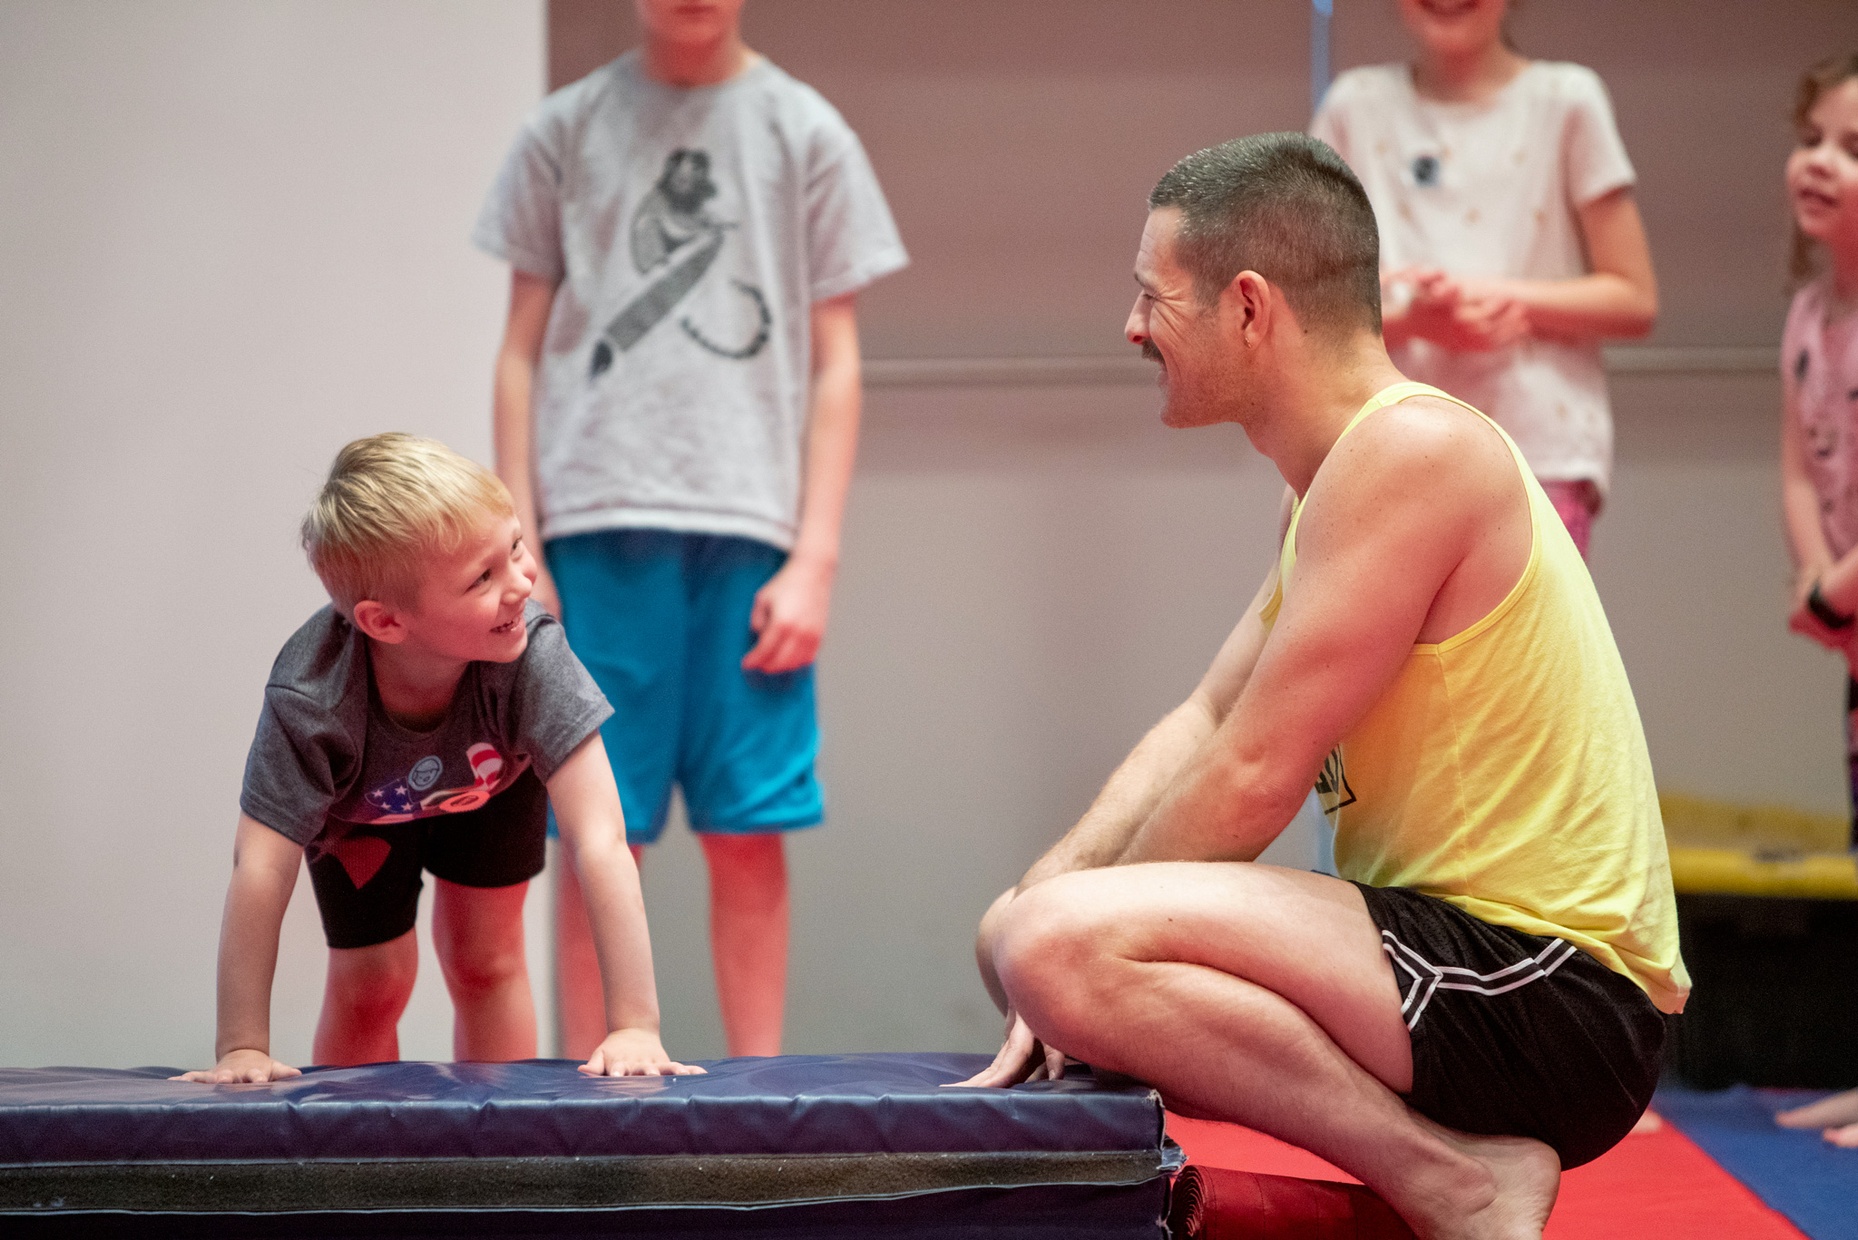 A little, white boy crouched on a blue mat and a male dancer smile at each other during a movement workshop.